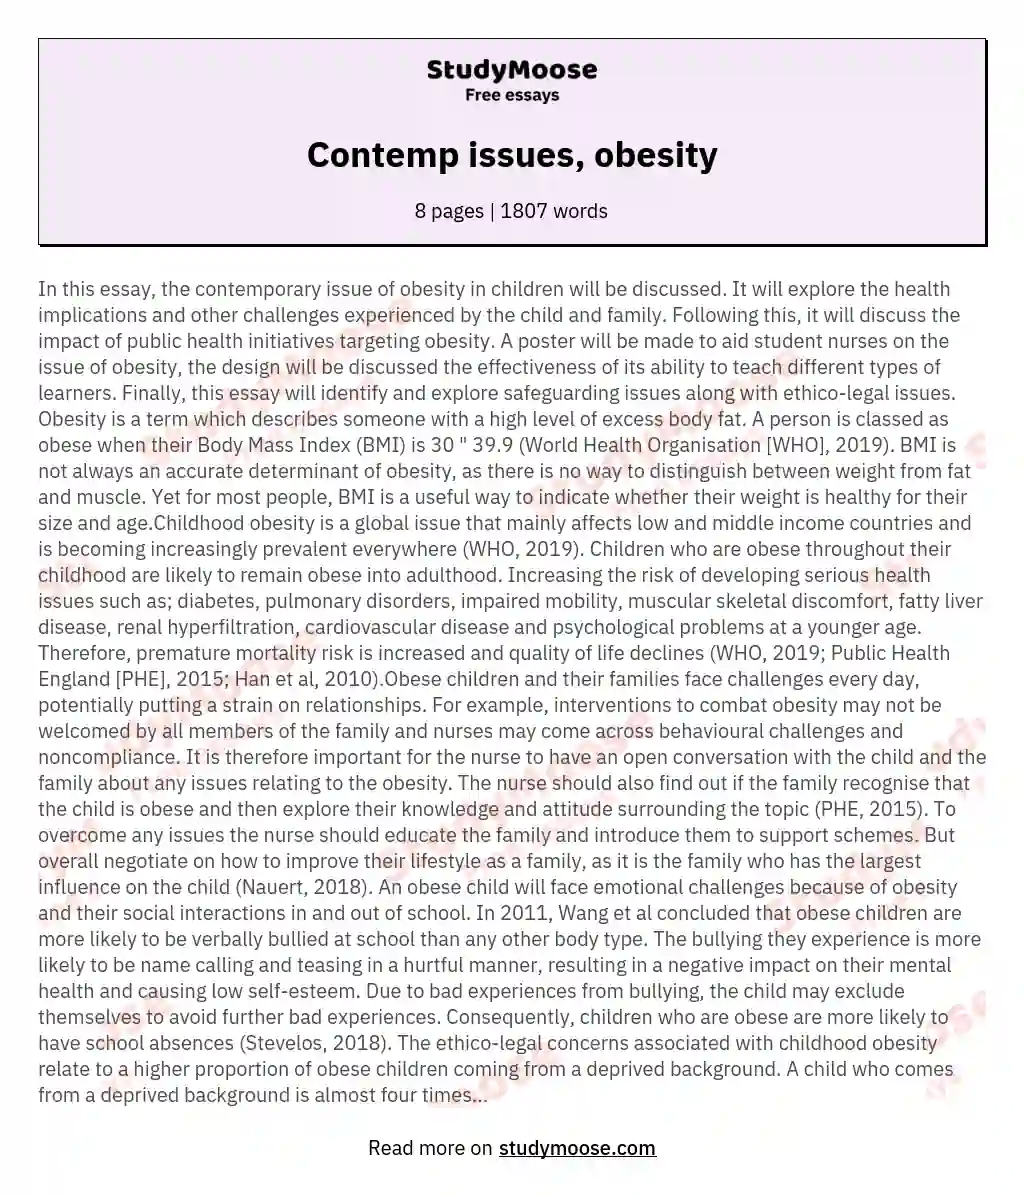 Contemp issues, obesity essay